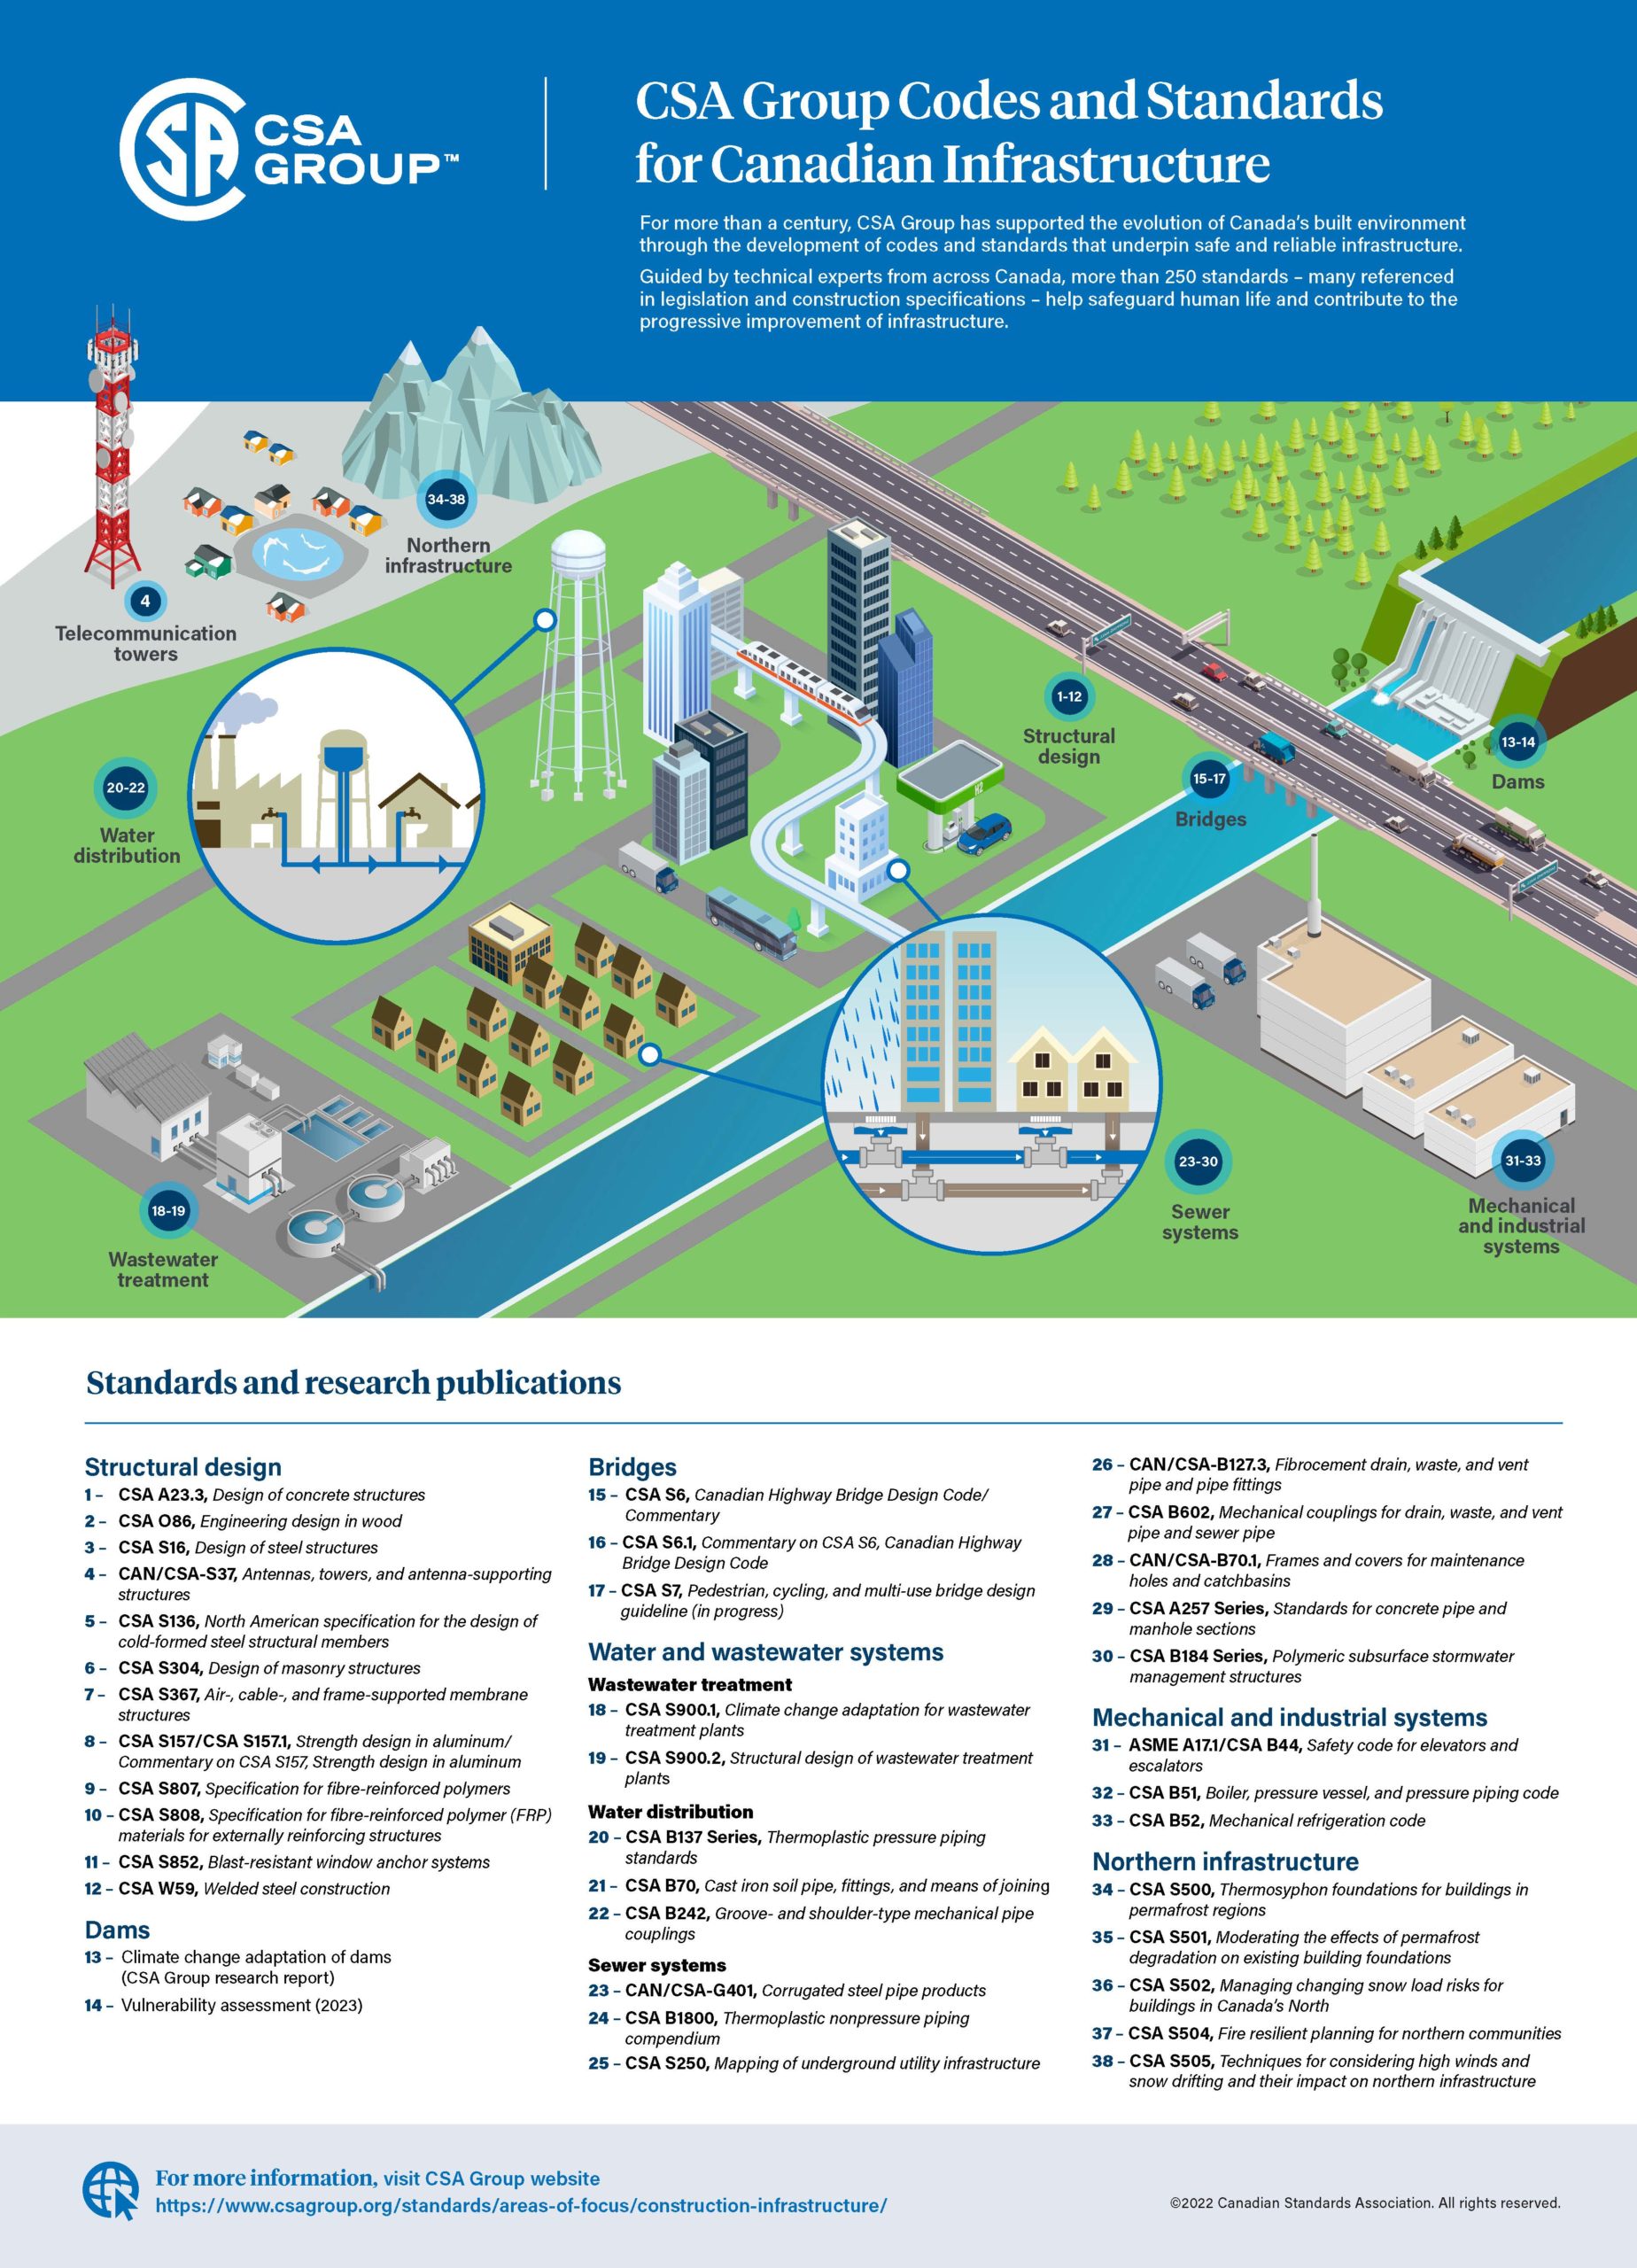 L'image sélectionnée. CSA Group Codes and Standards for infrastructure infographic